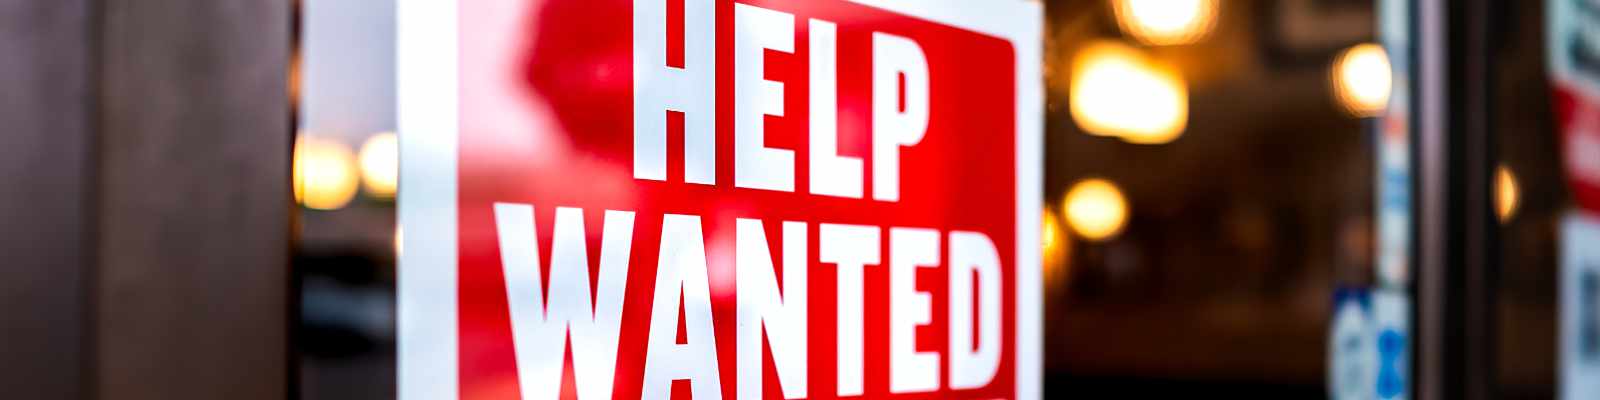 Putting out a help wanted sign to attract a strategic planning consultant.